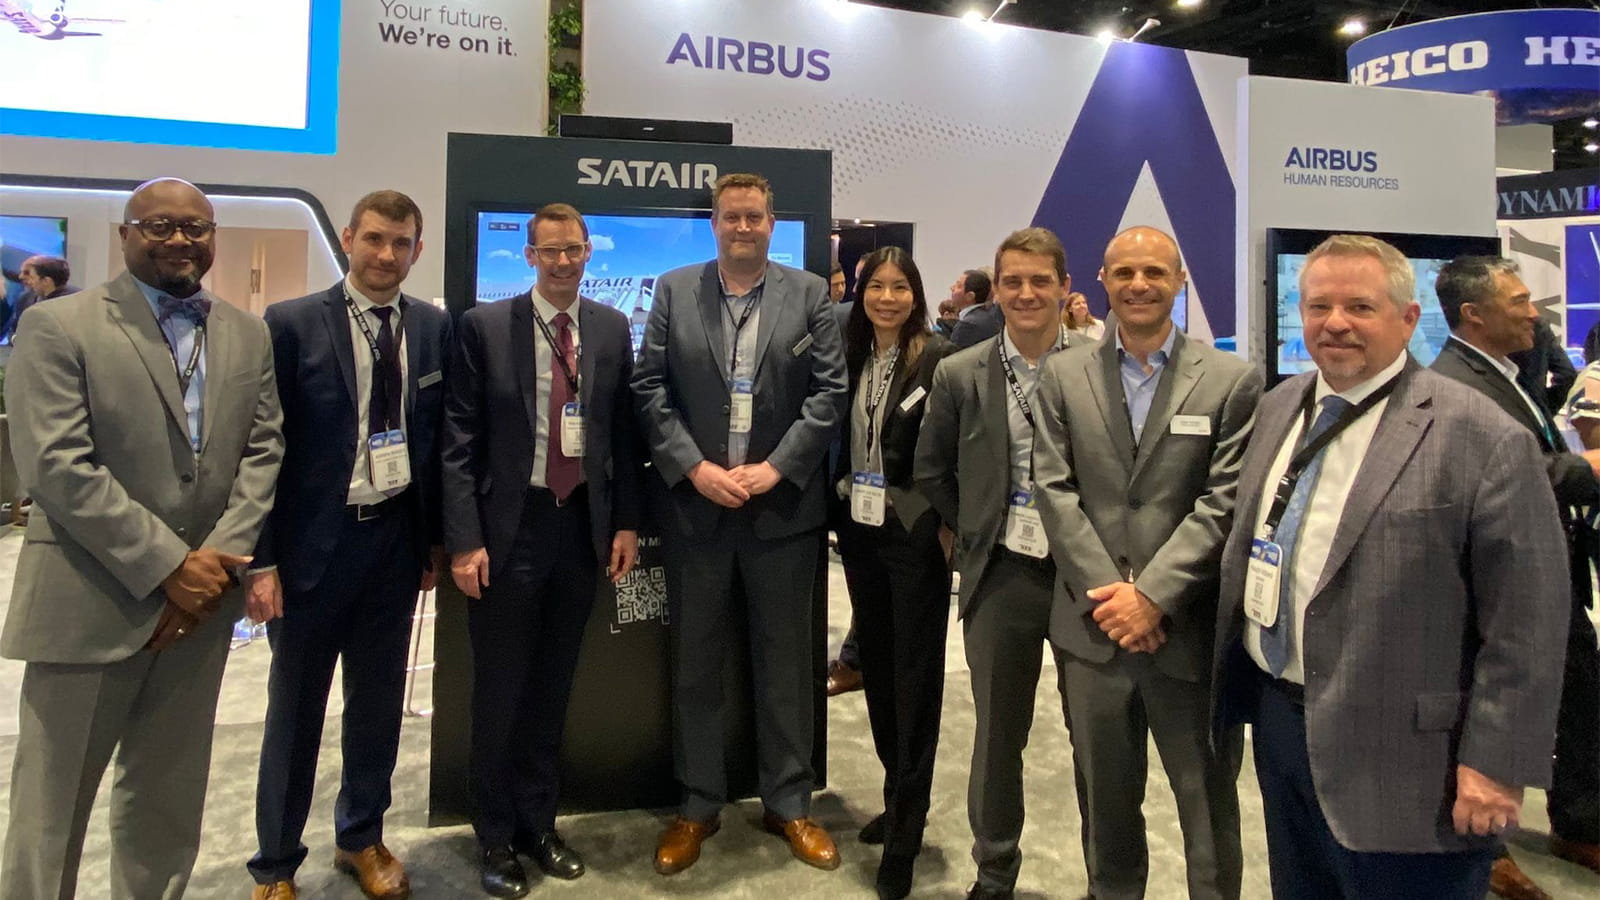 Collins and Satair leaders participate in a signing ceremony at MRO Americas